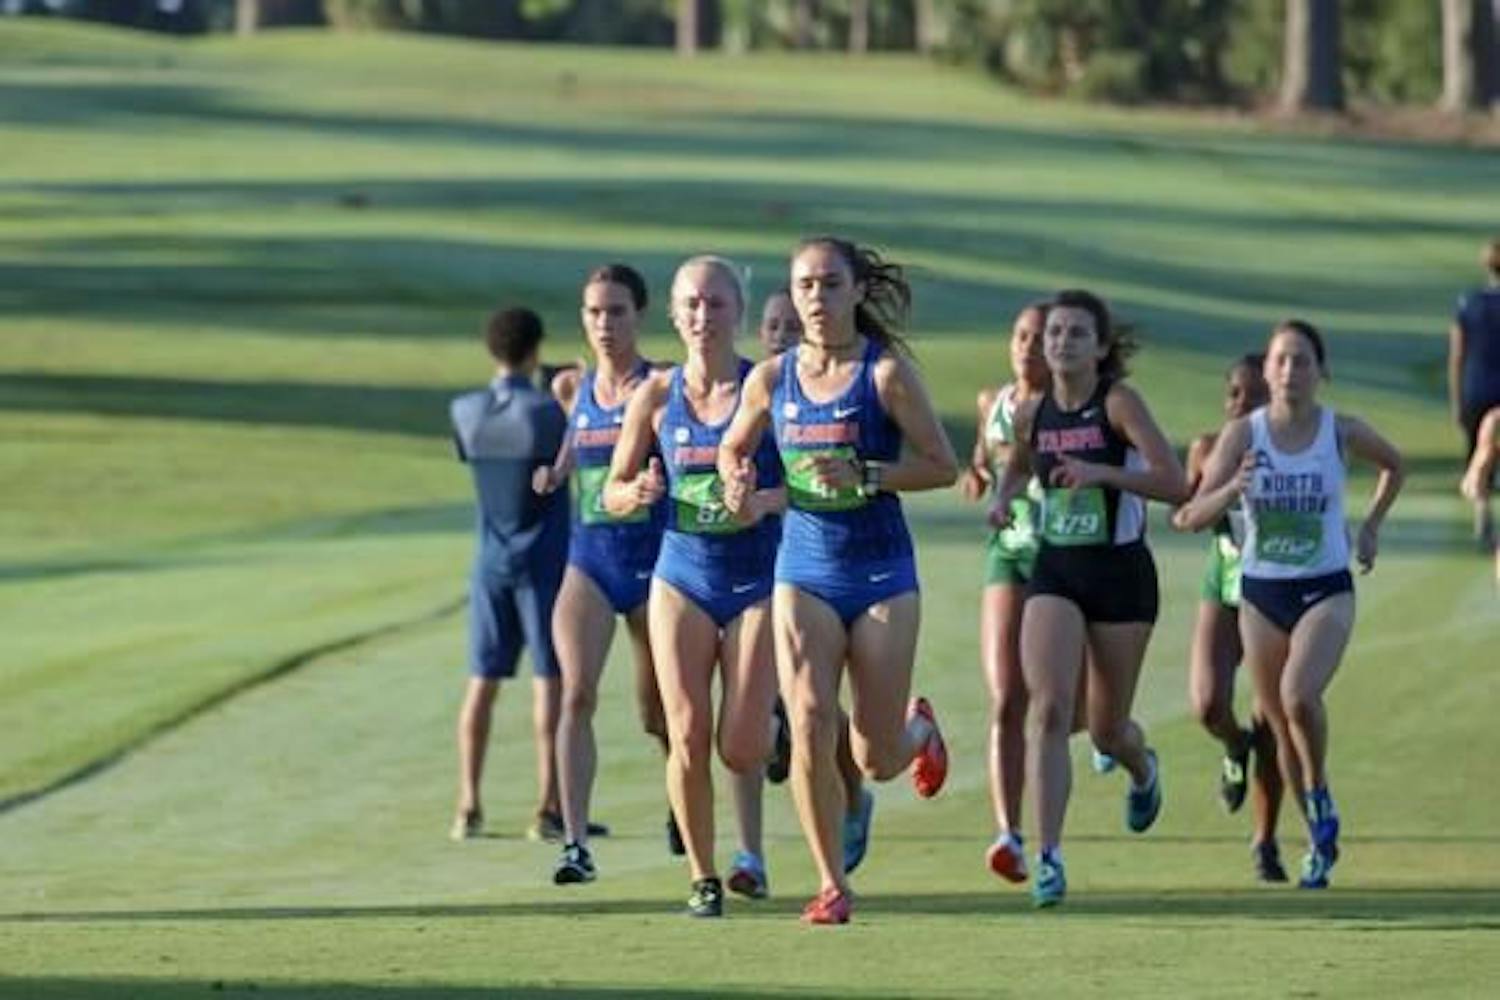 Both Gators squads finished in the top eight at the FSU Invitational Friday.